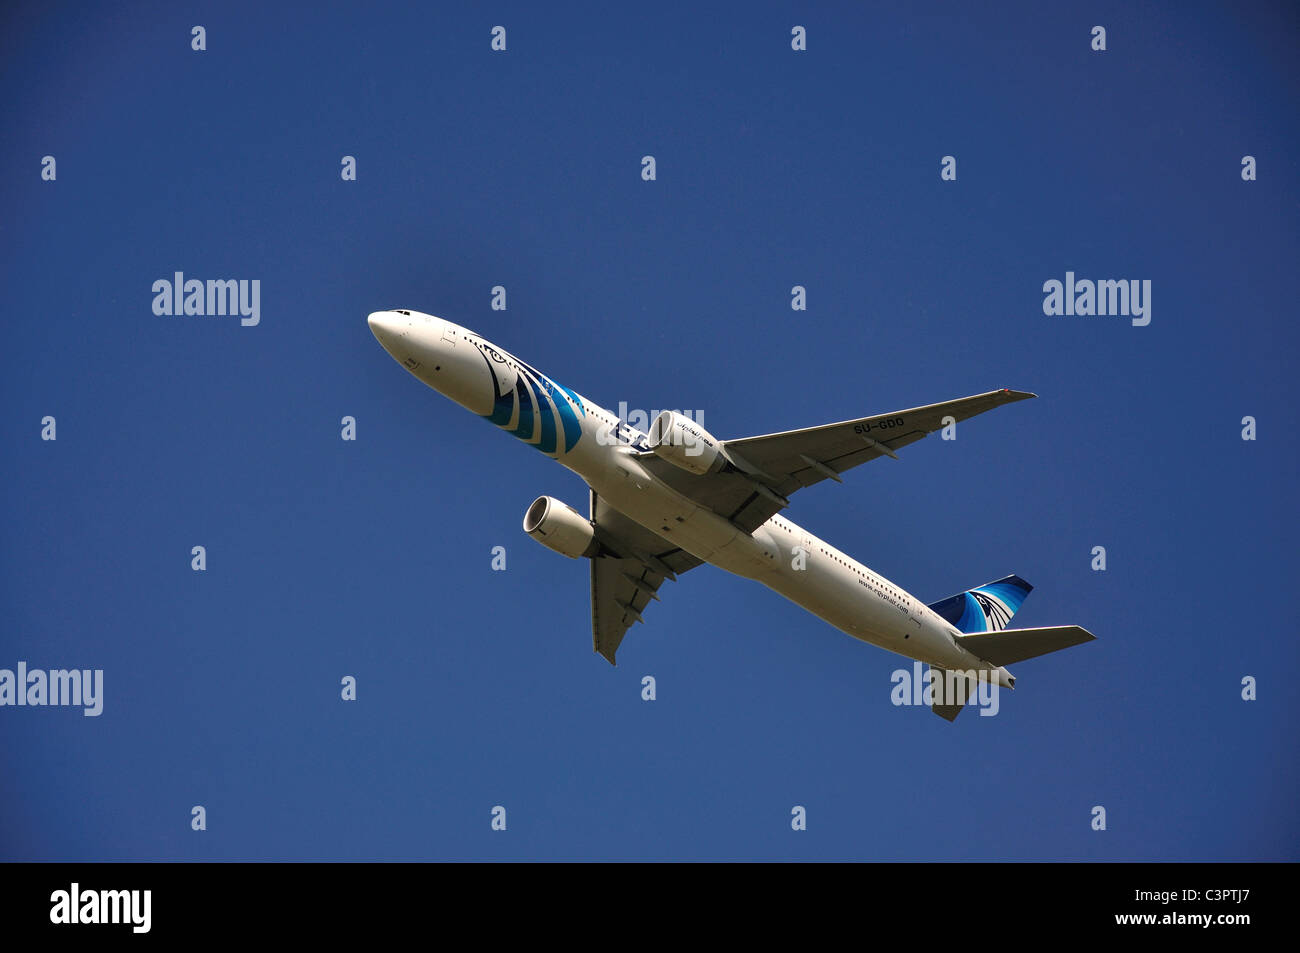 Egyptair Boeing 777 aircraft taking off from Heathrow Airport, Greater London, England, United Kingdom Stock Photo